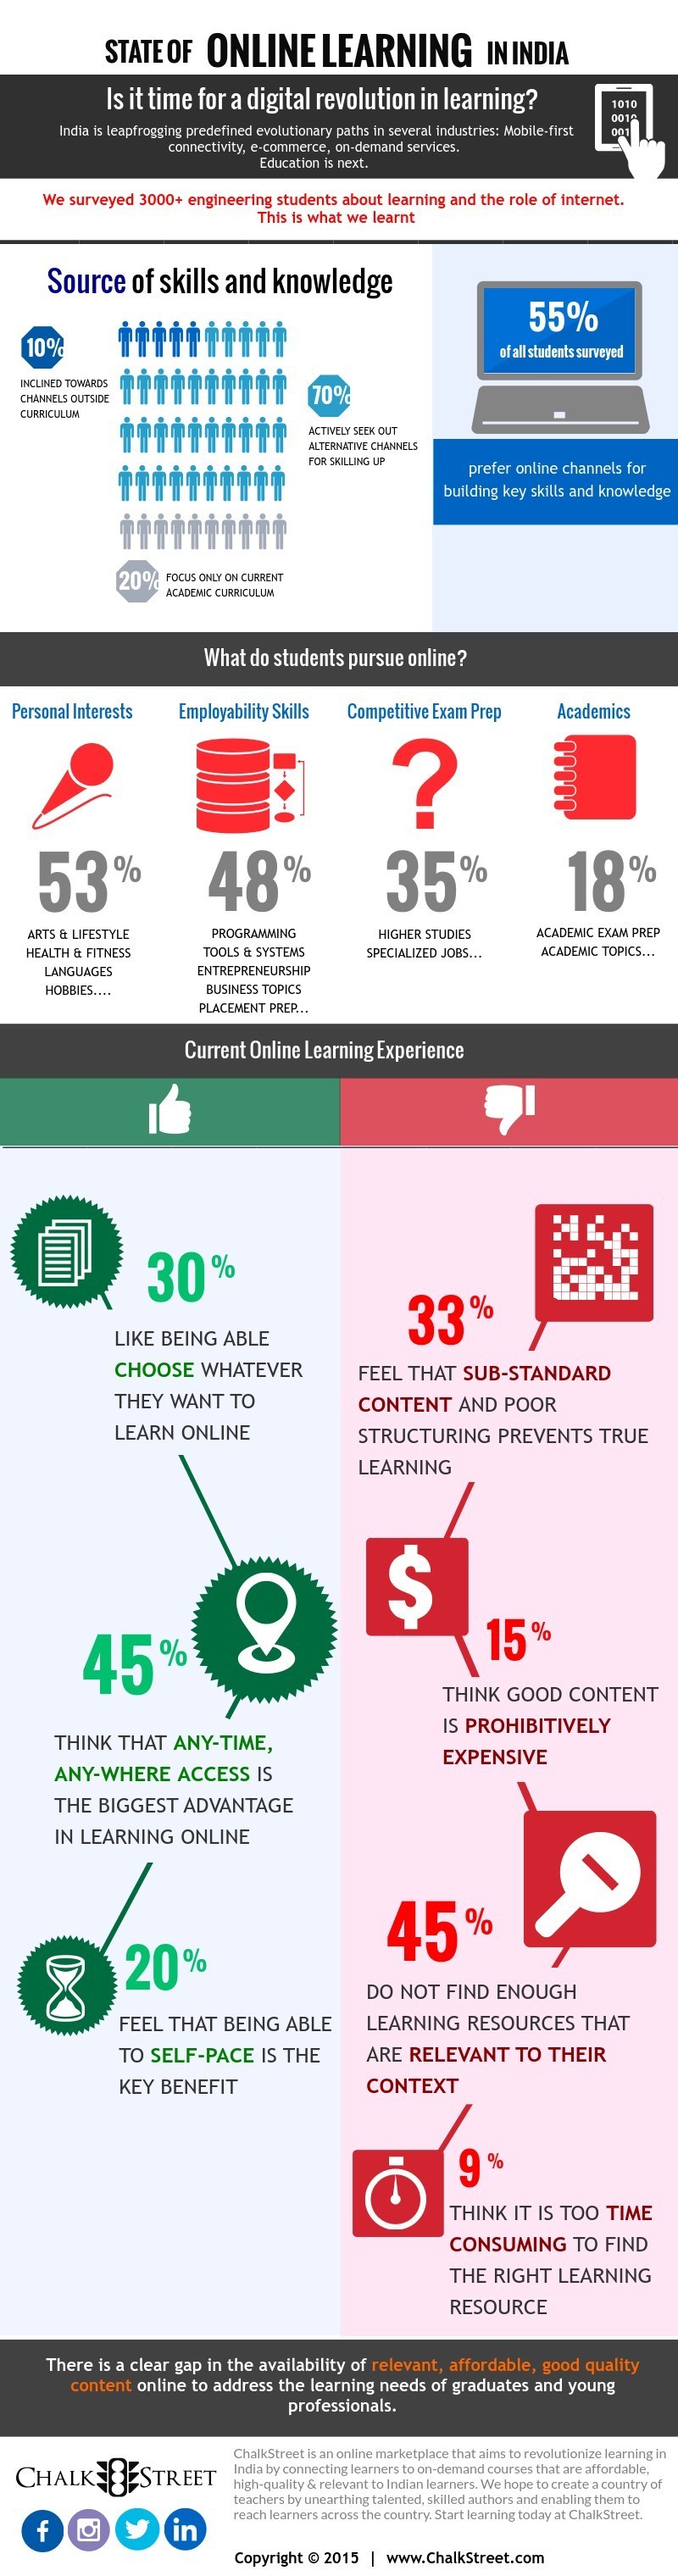 Online Learning in India Infographic